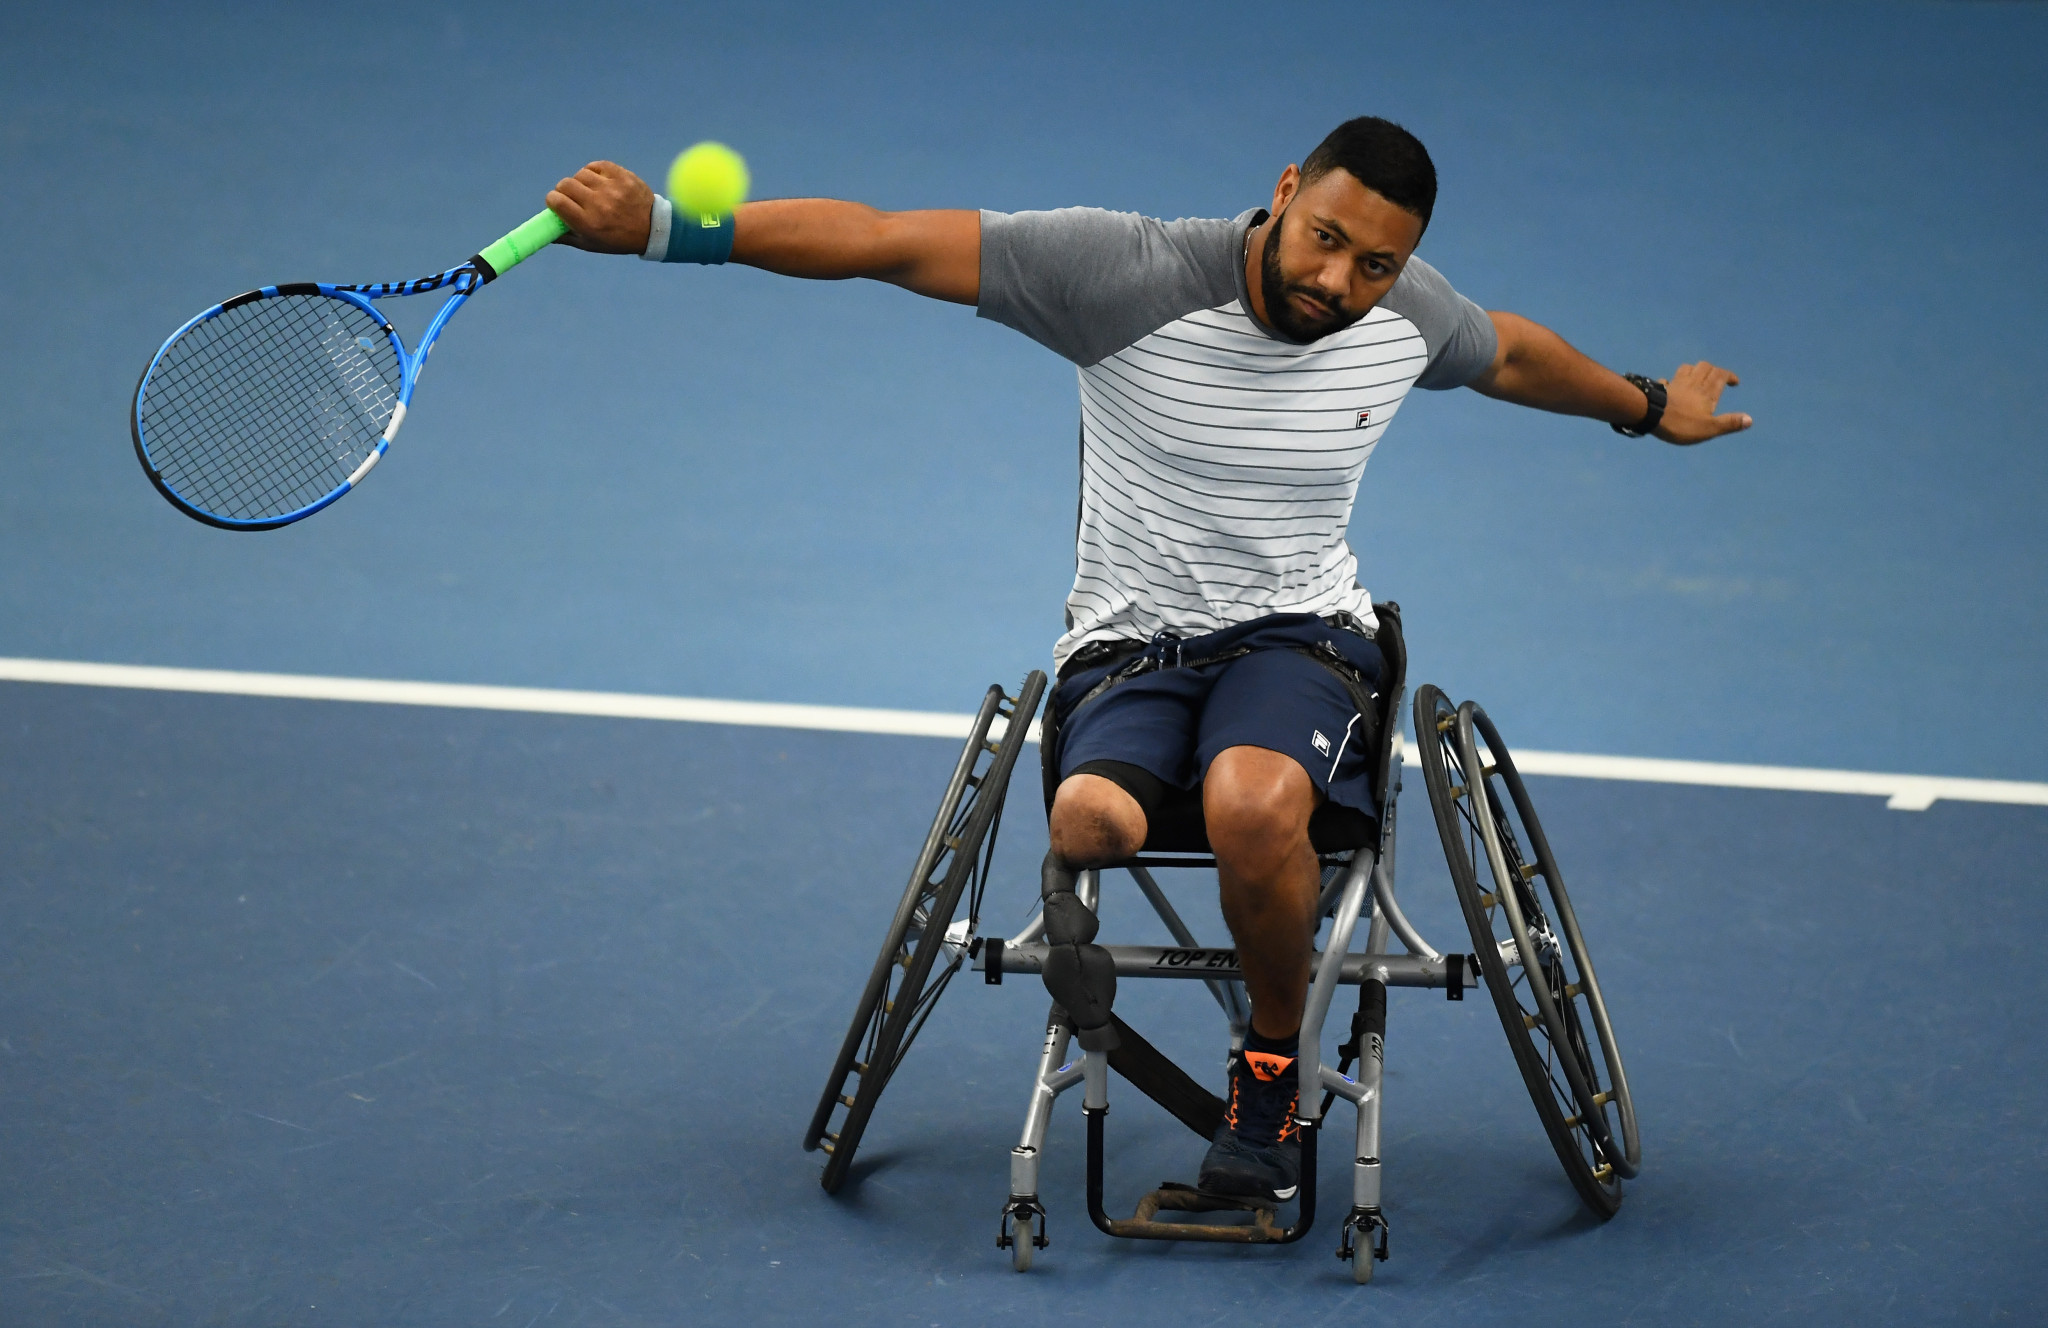 Third seeds fall in second round of singles at Belgian Wheelchair Tennis Open